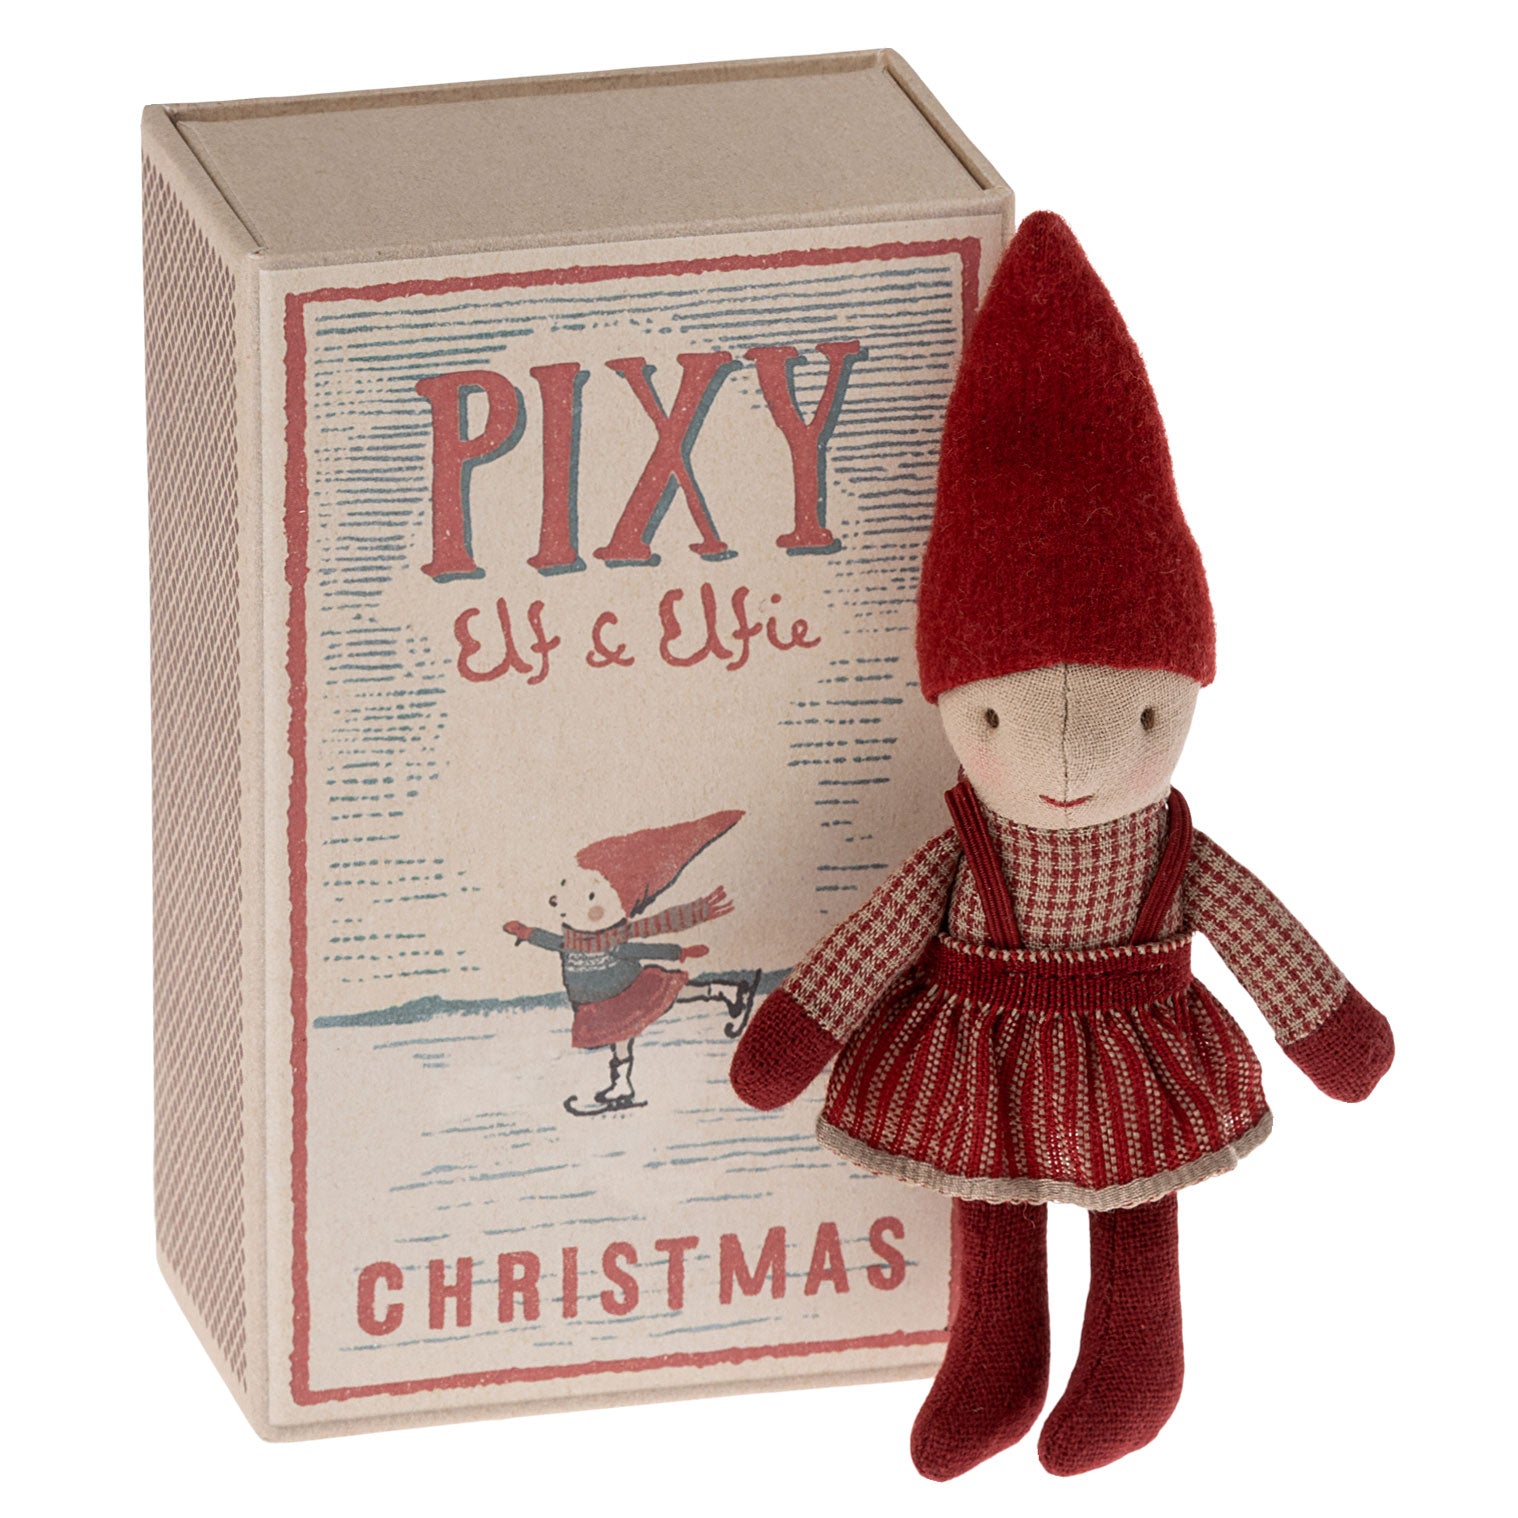 Maileg collectible Pixy Elfie for Christmas at Bonjour Baby Baskets